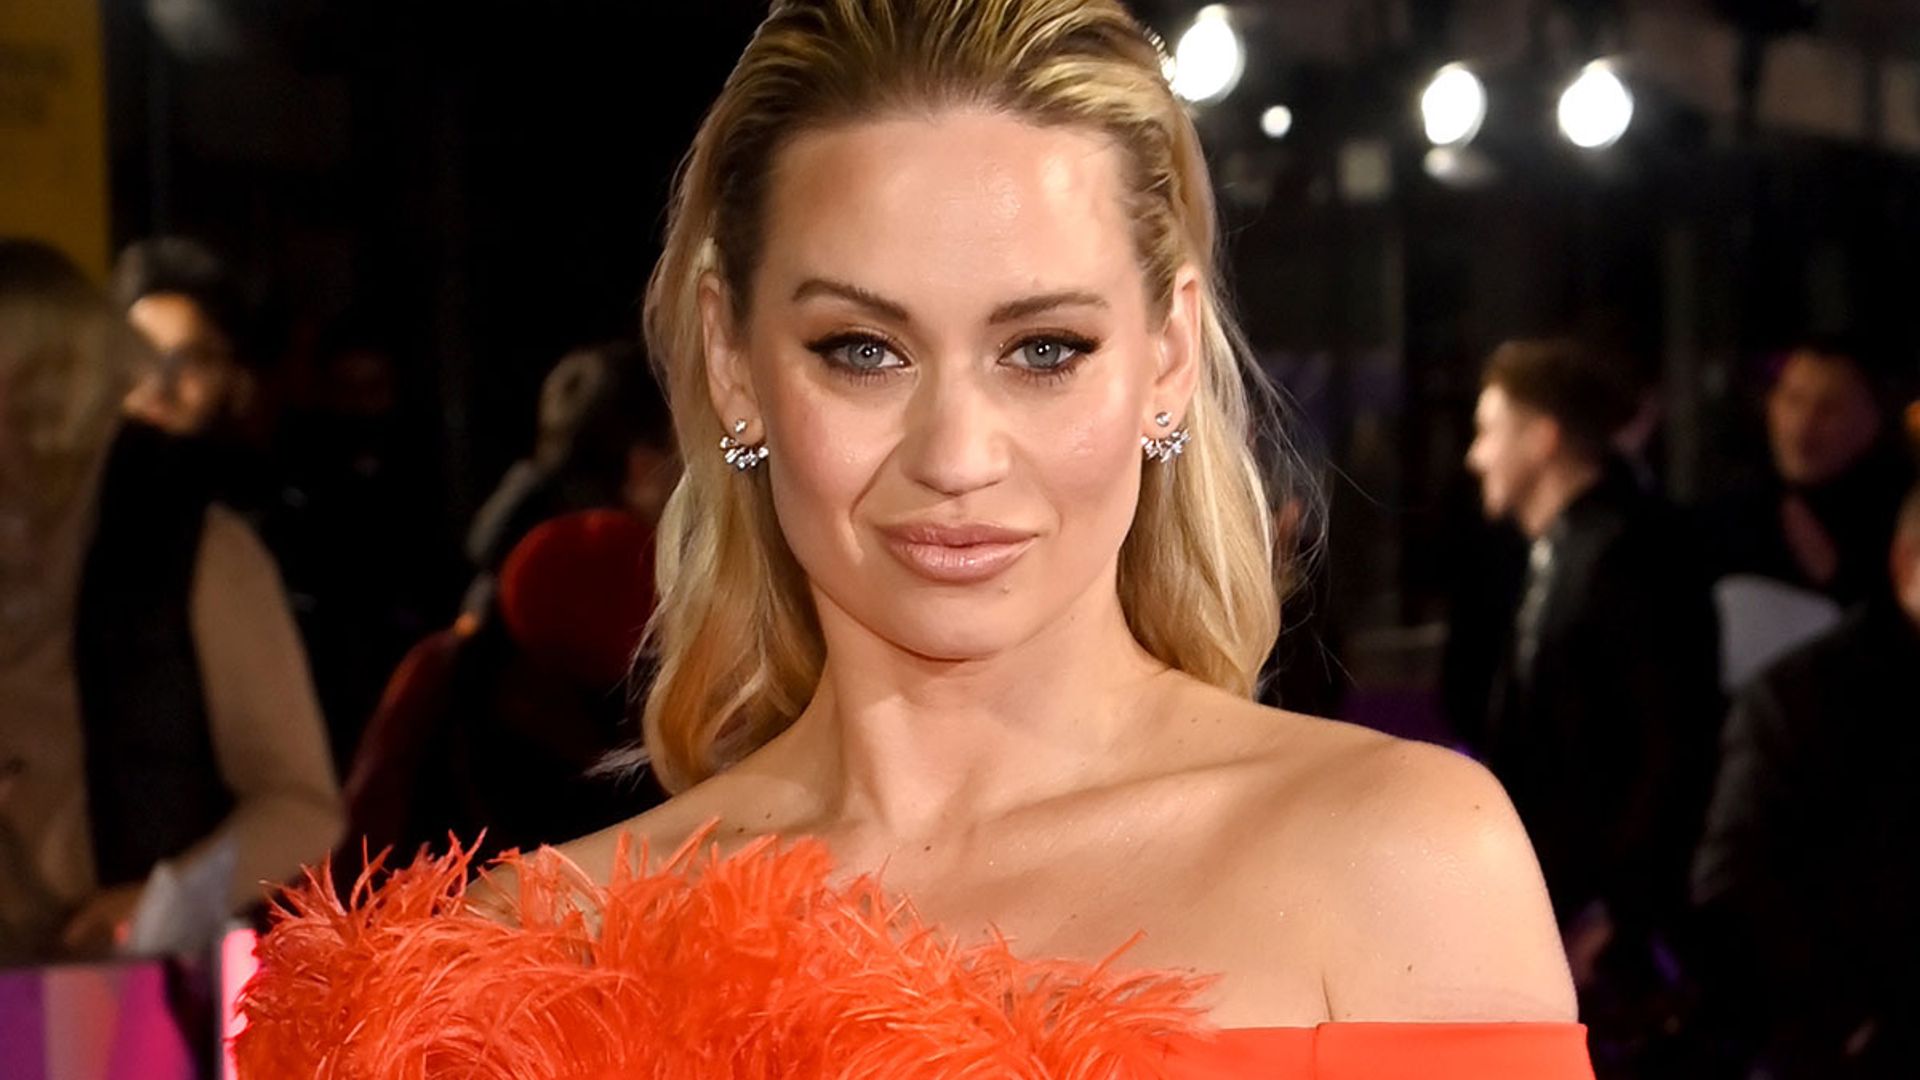 Dancing on Ice star Kimberly Wyatt's health and fitness secrets might surprise you